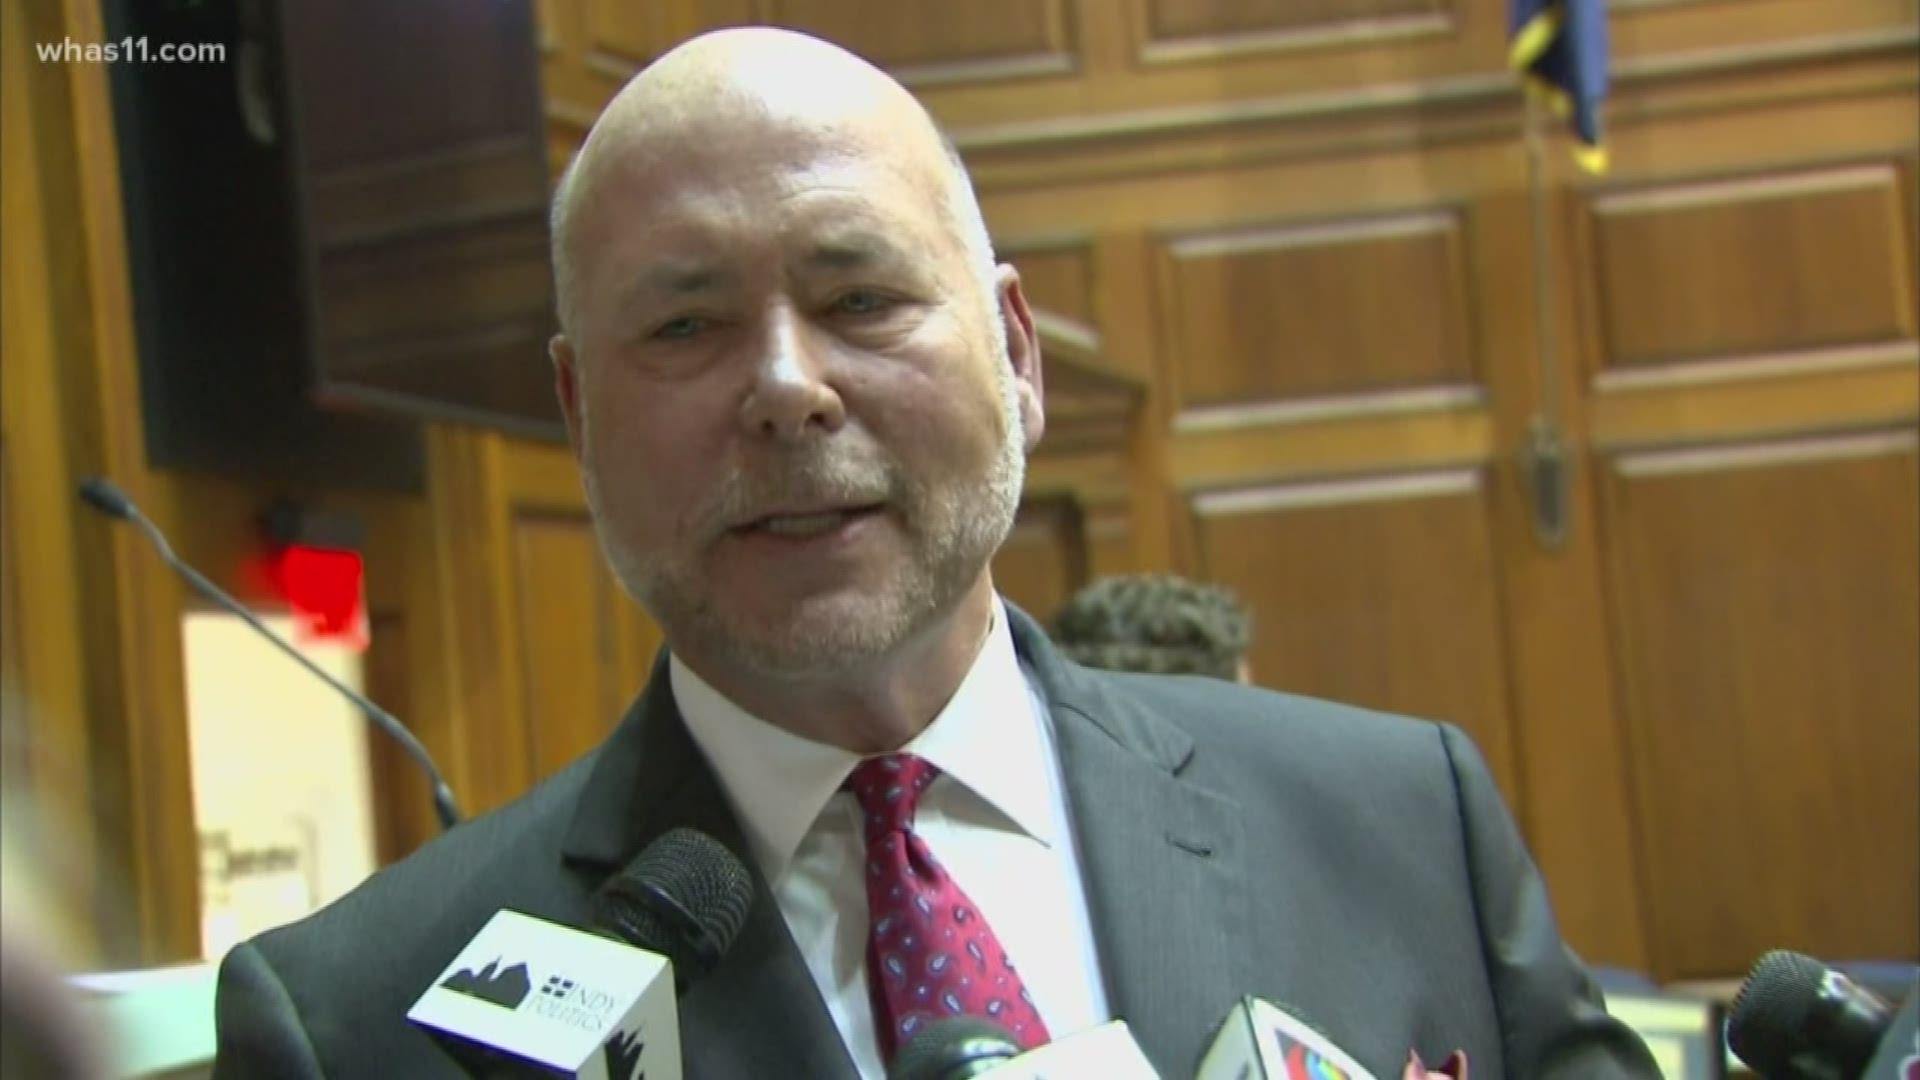 Republican Speaker Brian Bosma said he wouldn’t seek reelection in 2020 after 34 years in the House.